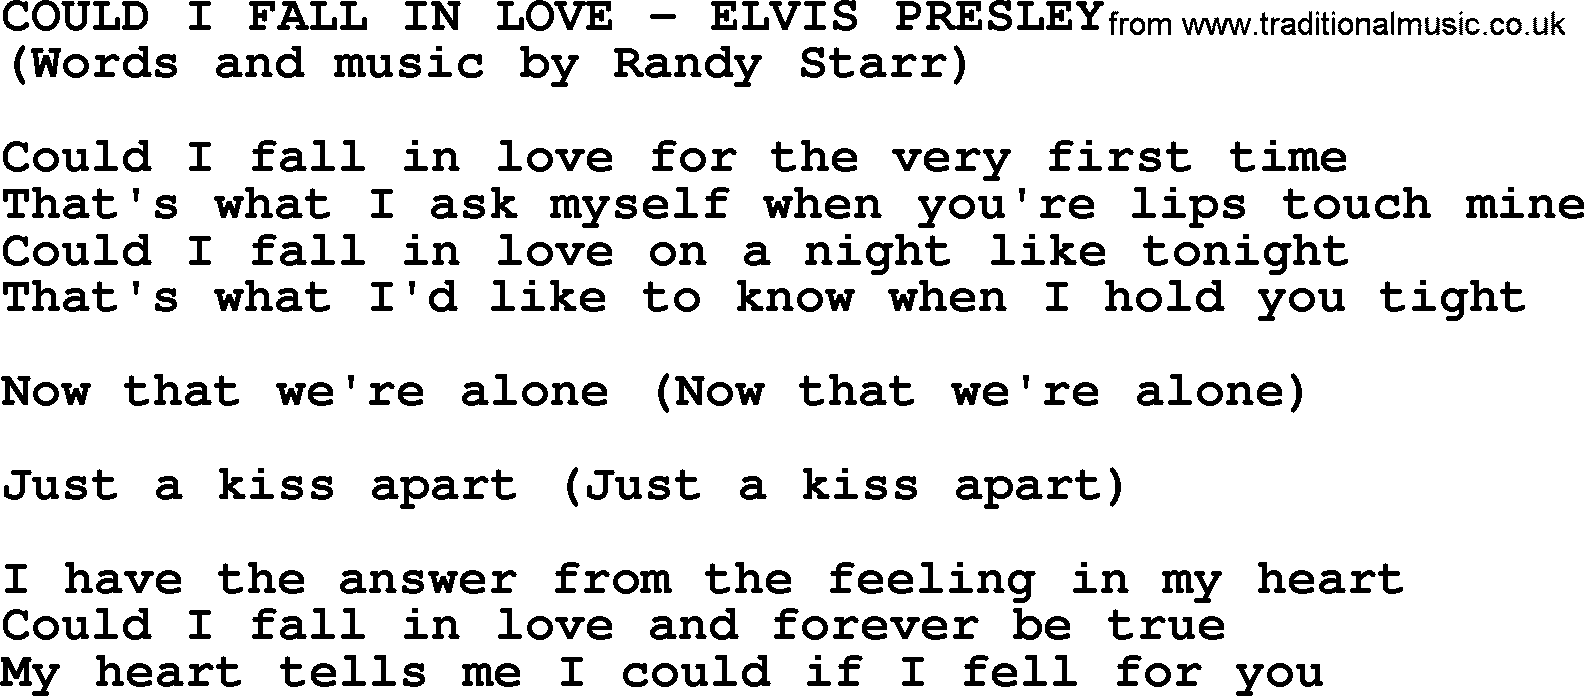 Elvis Presley song: Could I Fall In Love lyrics